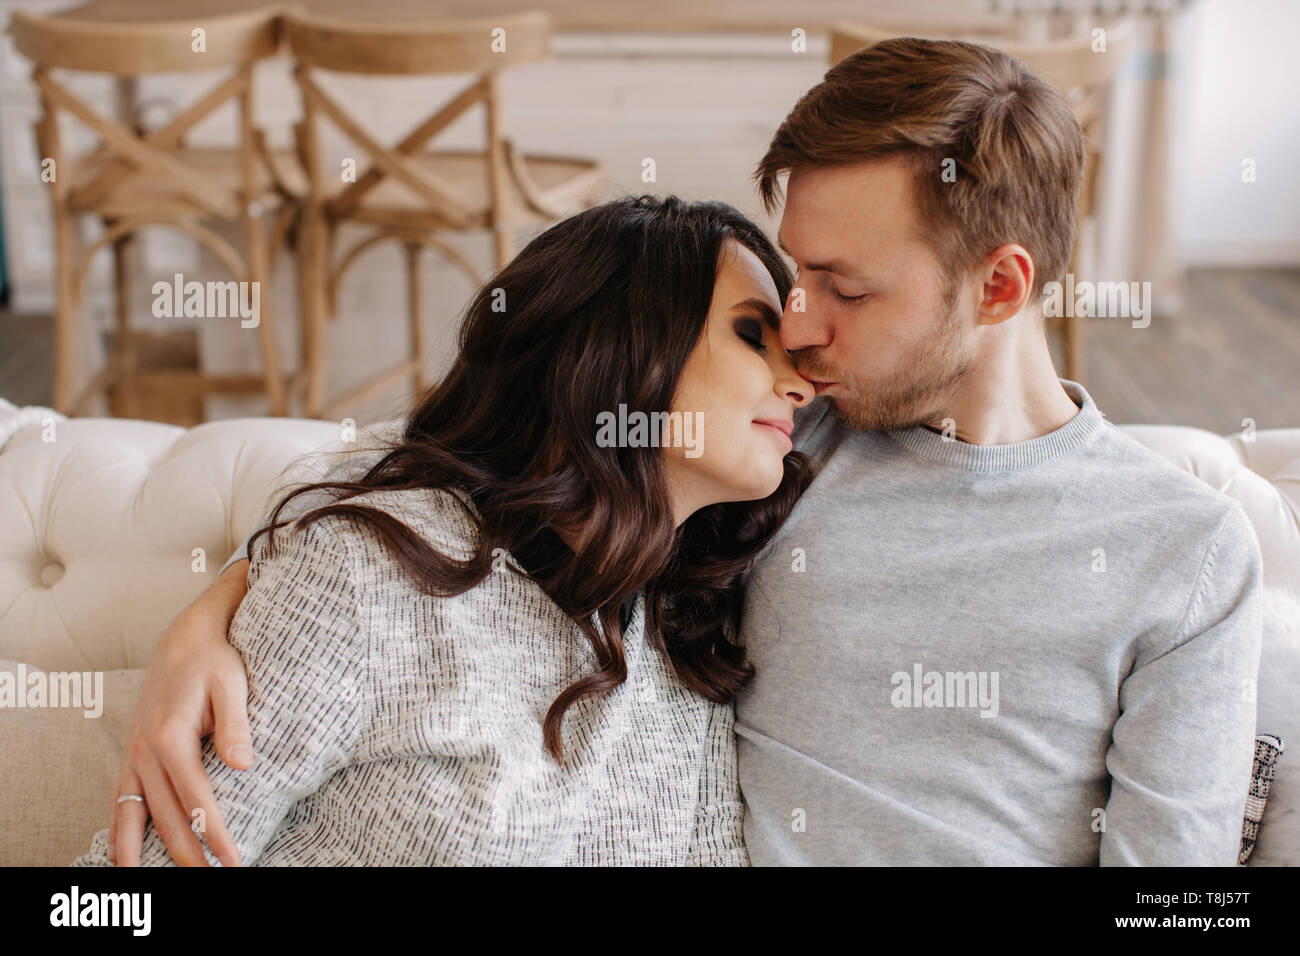 Heureux couple sitting on a couch nuzzling Banque D'Images